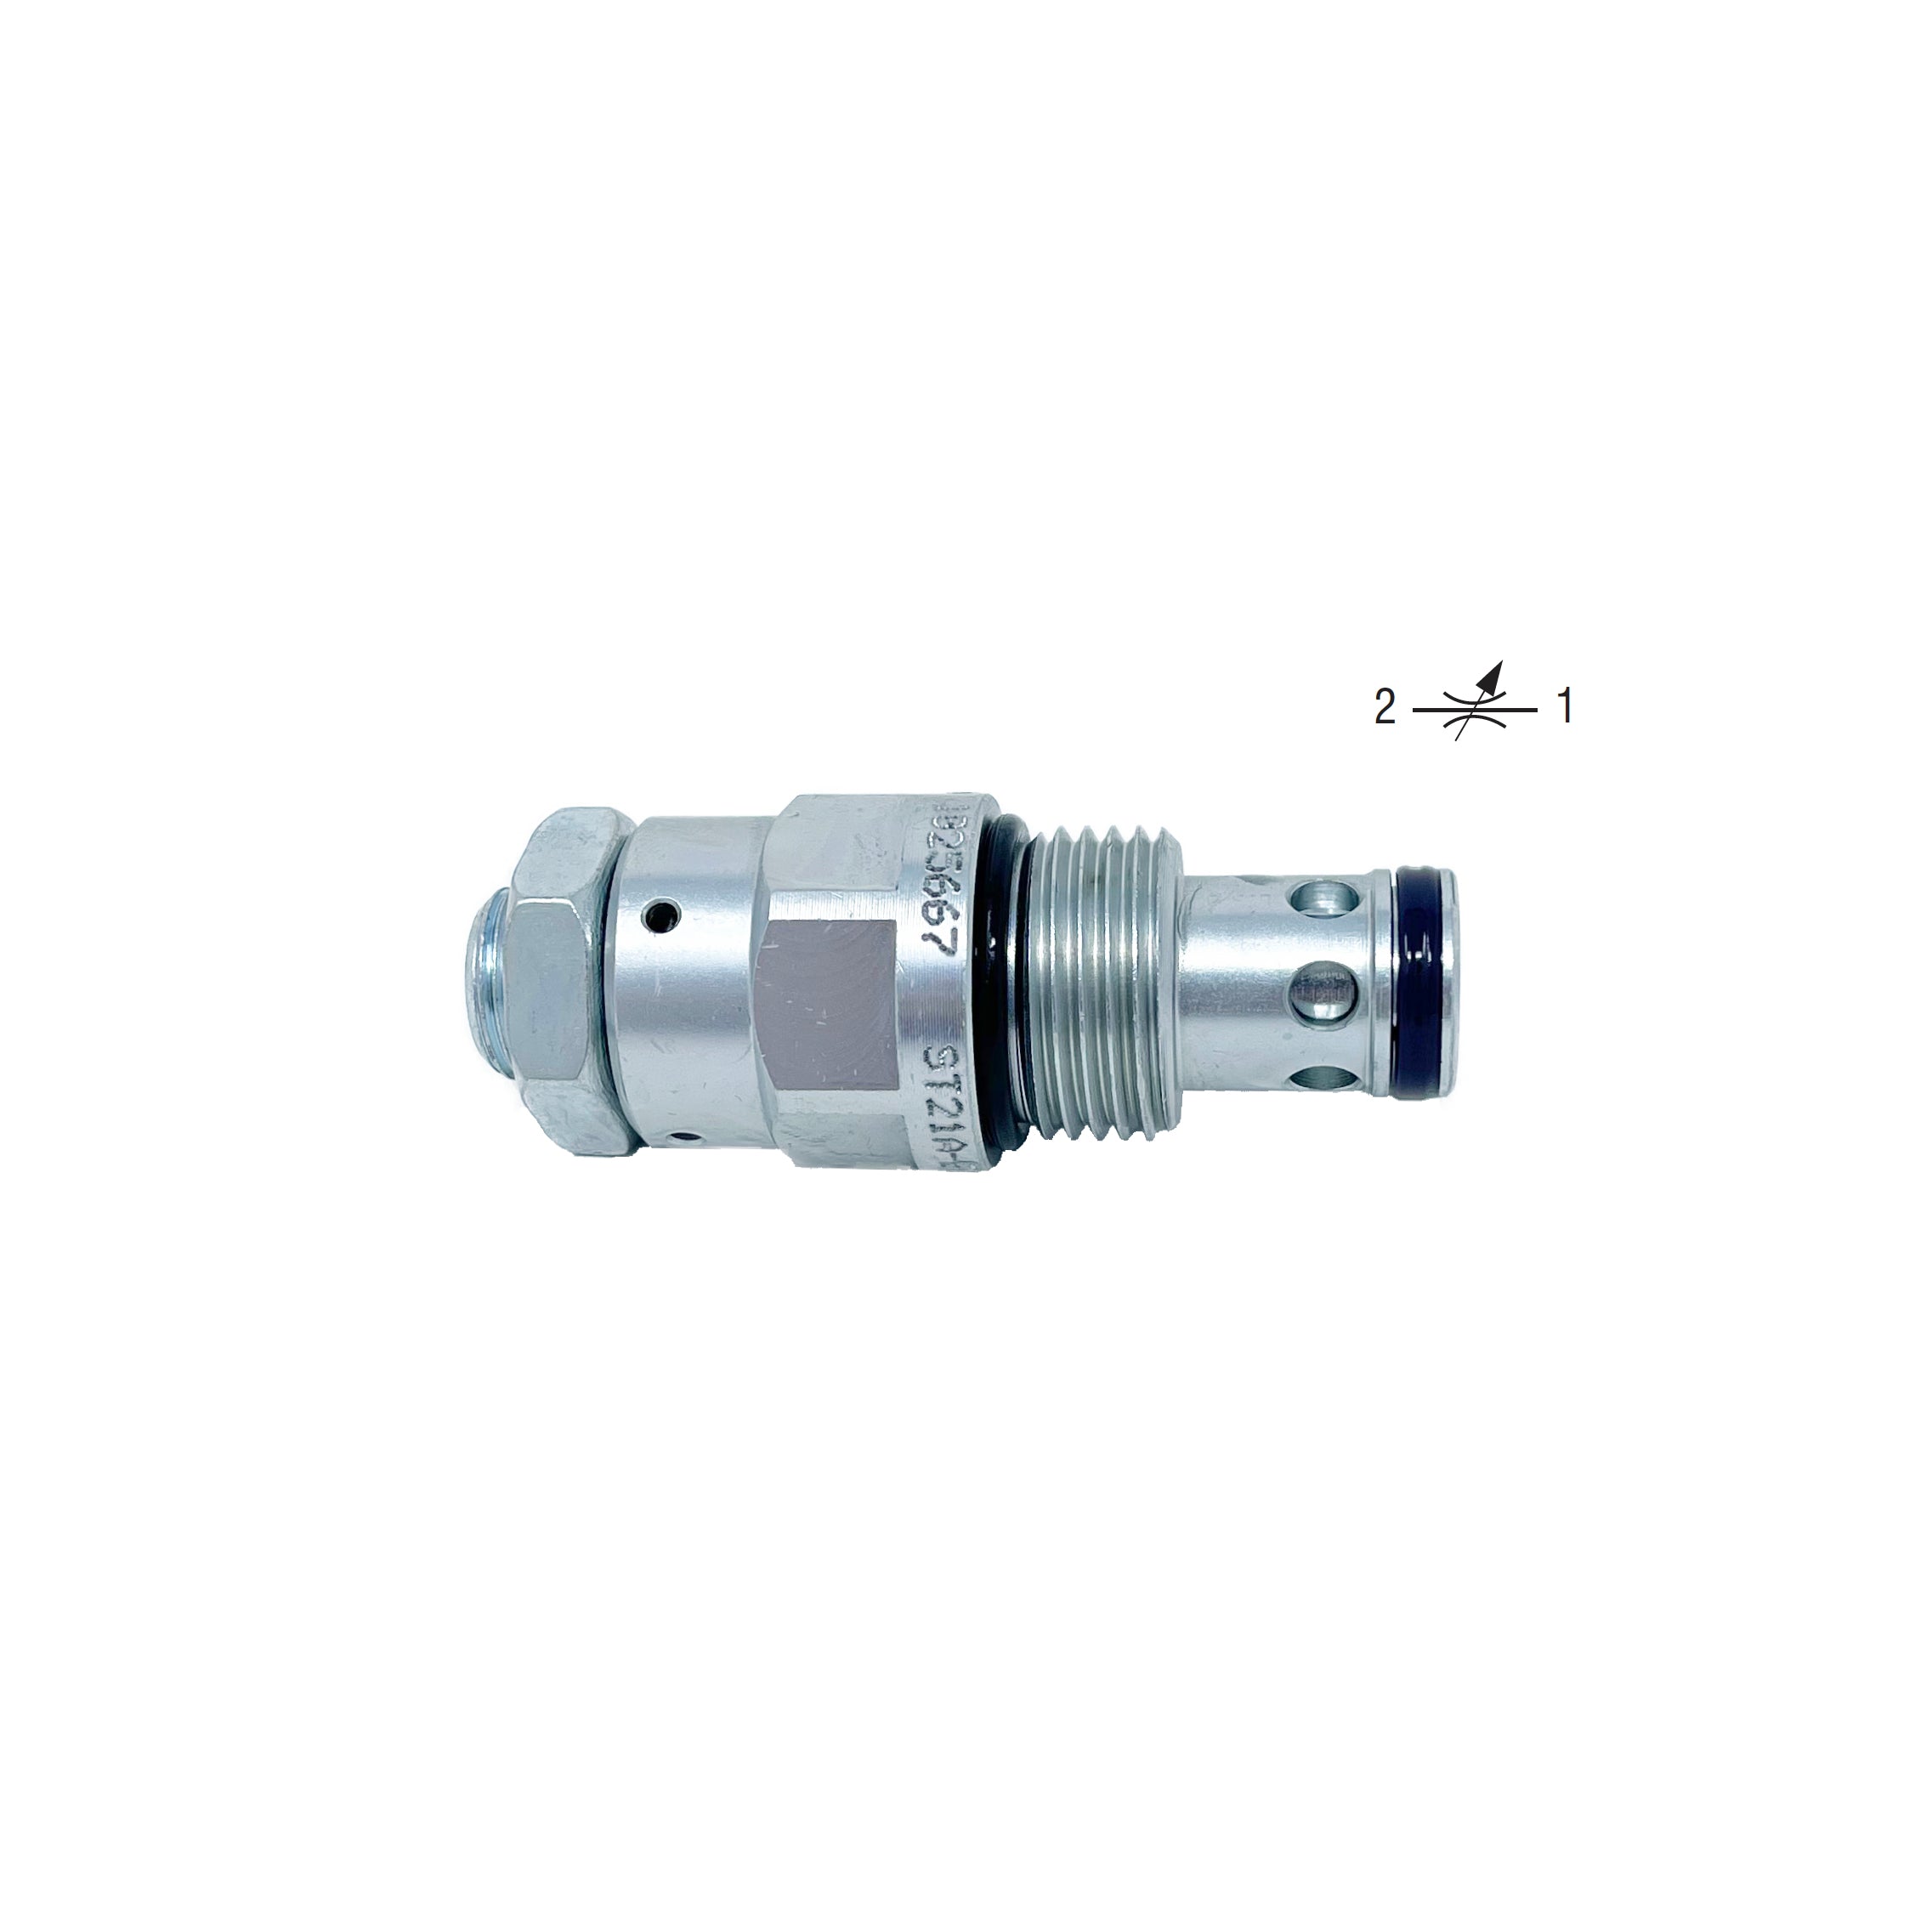 ST21A-B2/H140S-B : Argo-Hytos Needle Valve, 37 GPM, 5076psi, Allen Key Screw, Fits C-10-2 Cavity, with Corrosion Resistant Coating